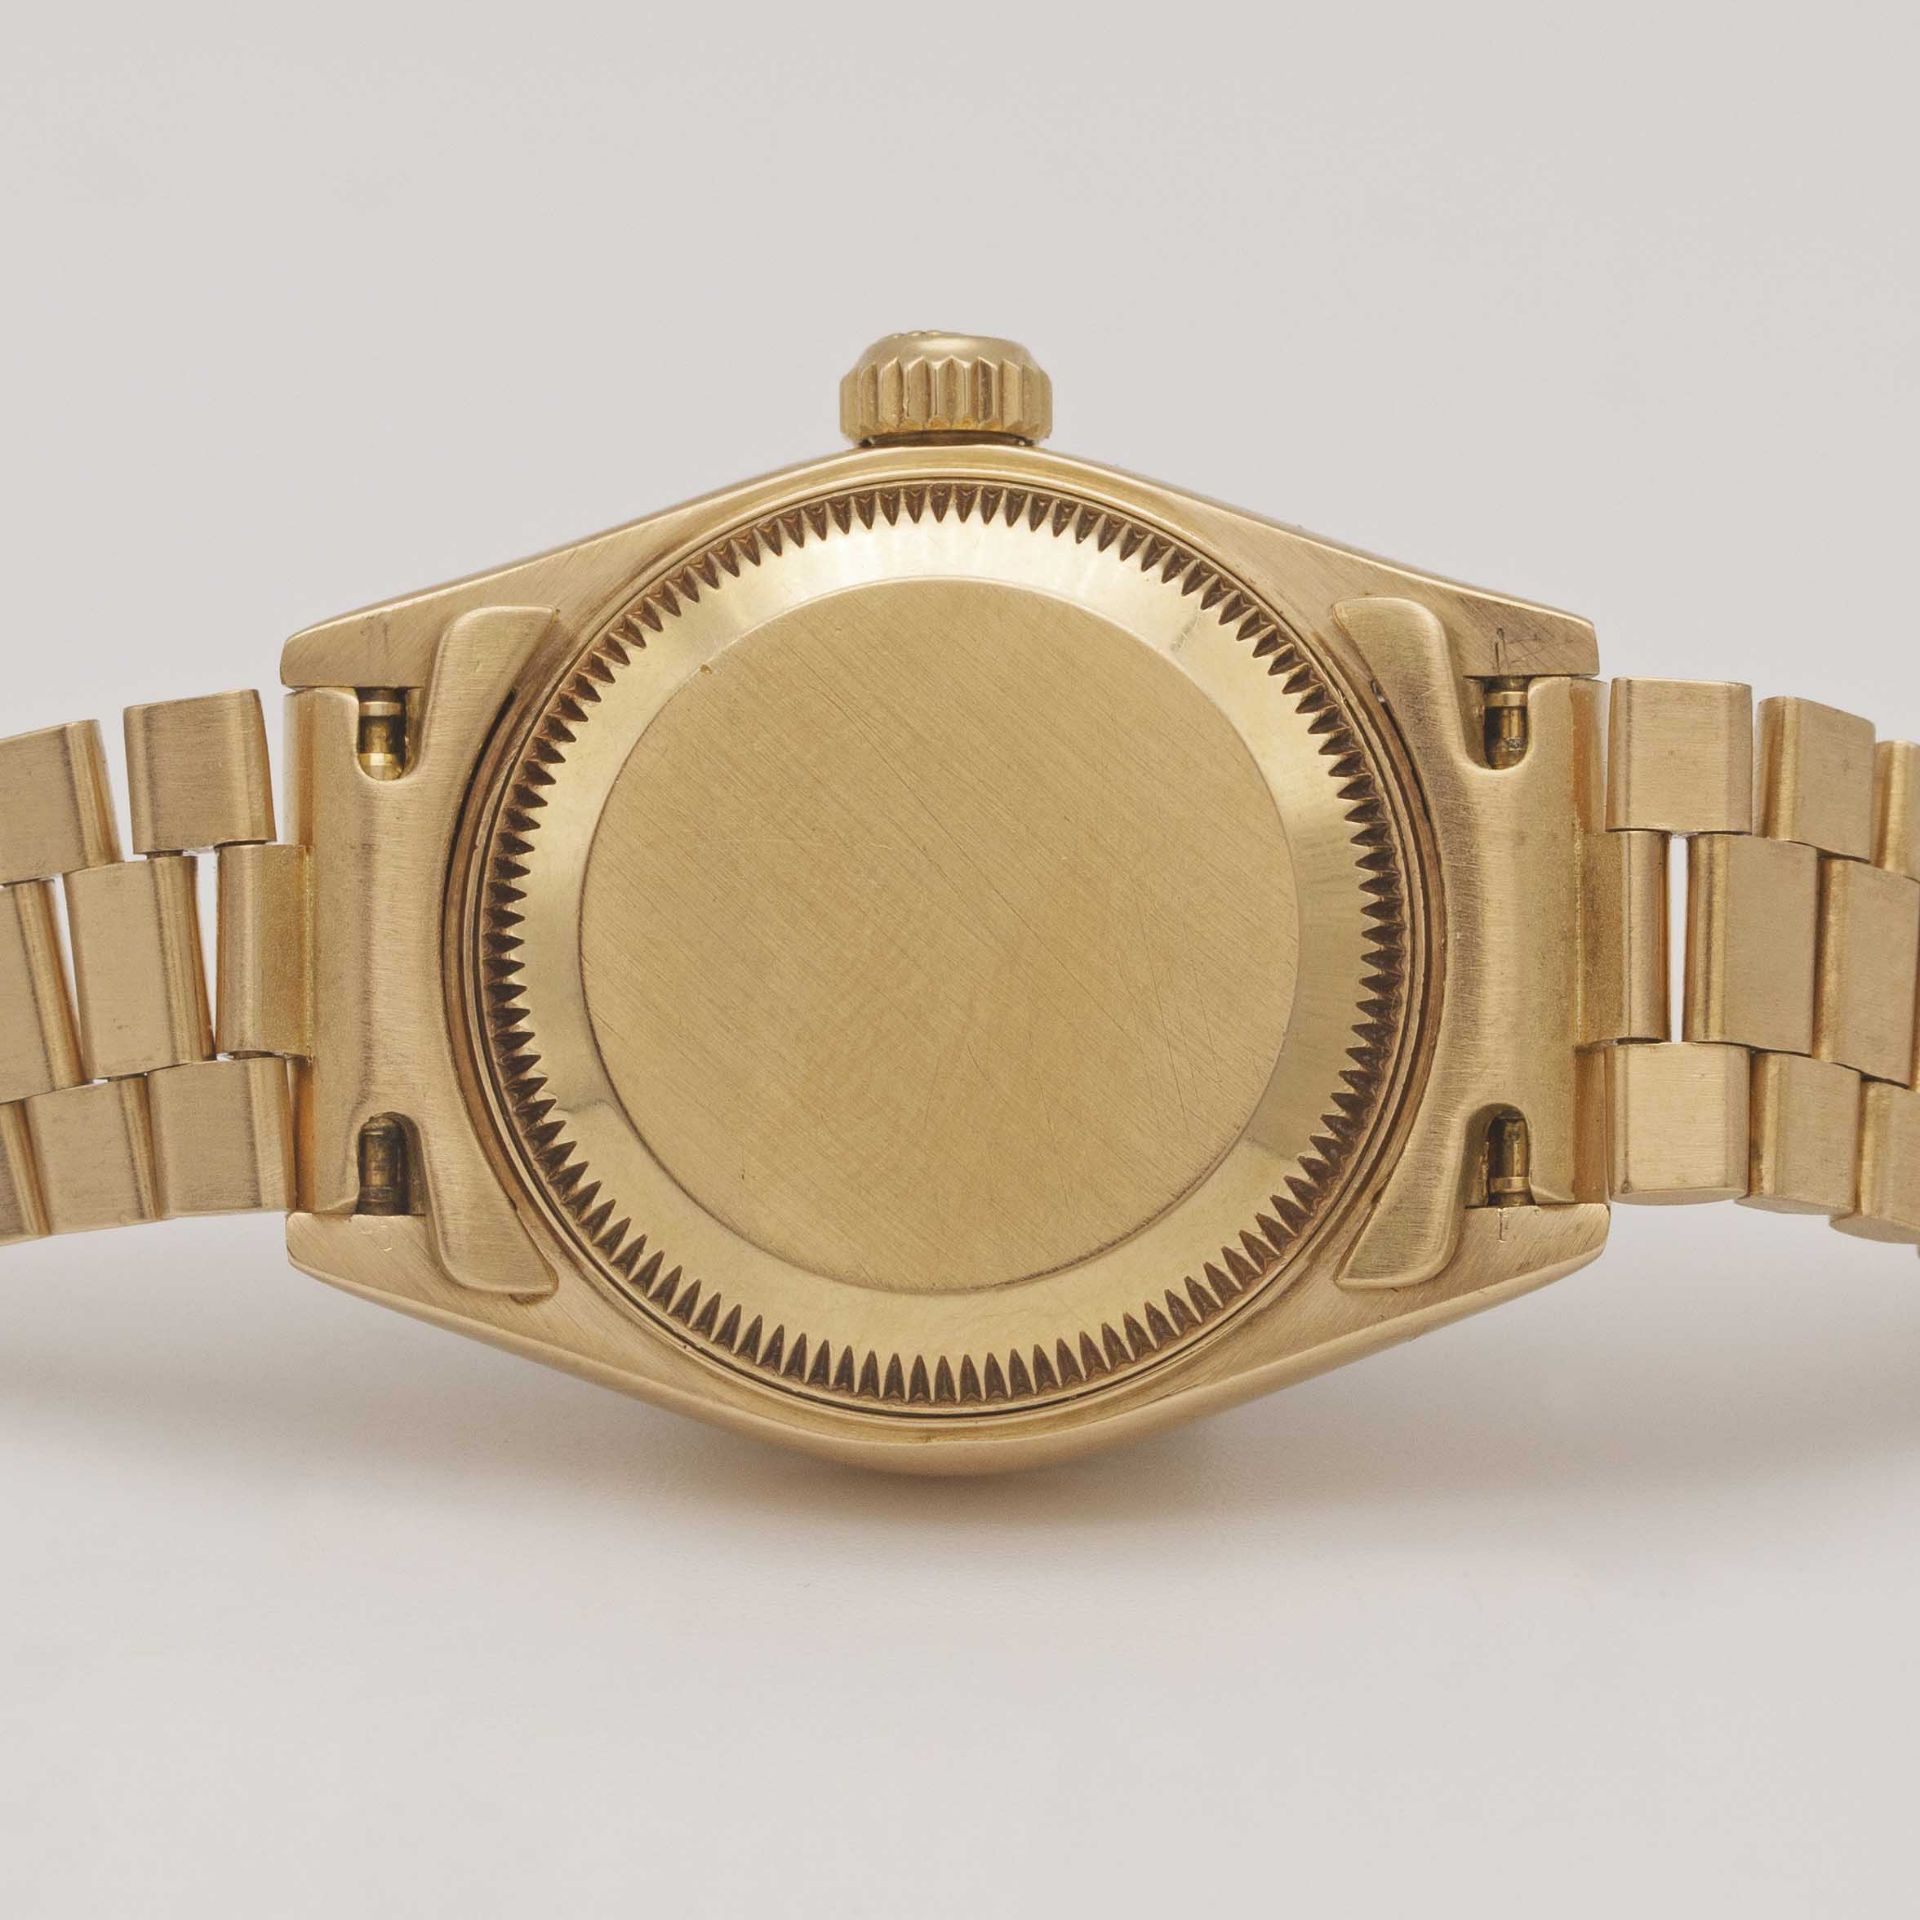 A LADIES 18K SOLID GOLD ROLEX OYSTER PERPETUAL DATEJUST BRACELET WATCH CIRCA 1996, REF. 69178 WITH - Image 6 of 12